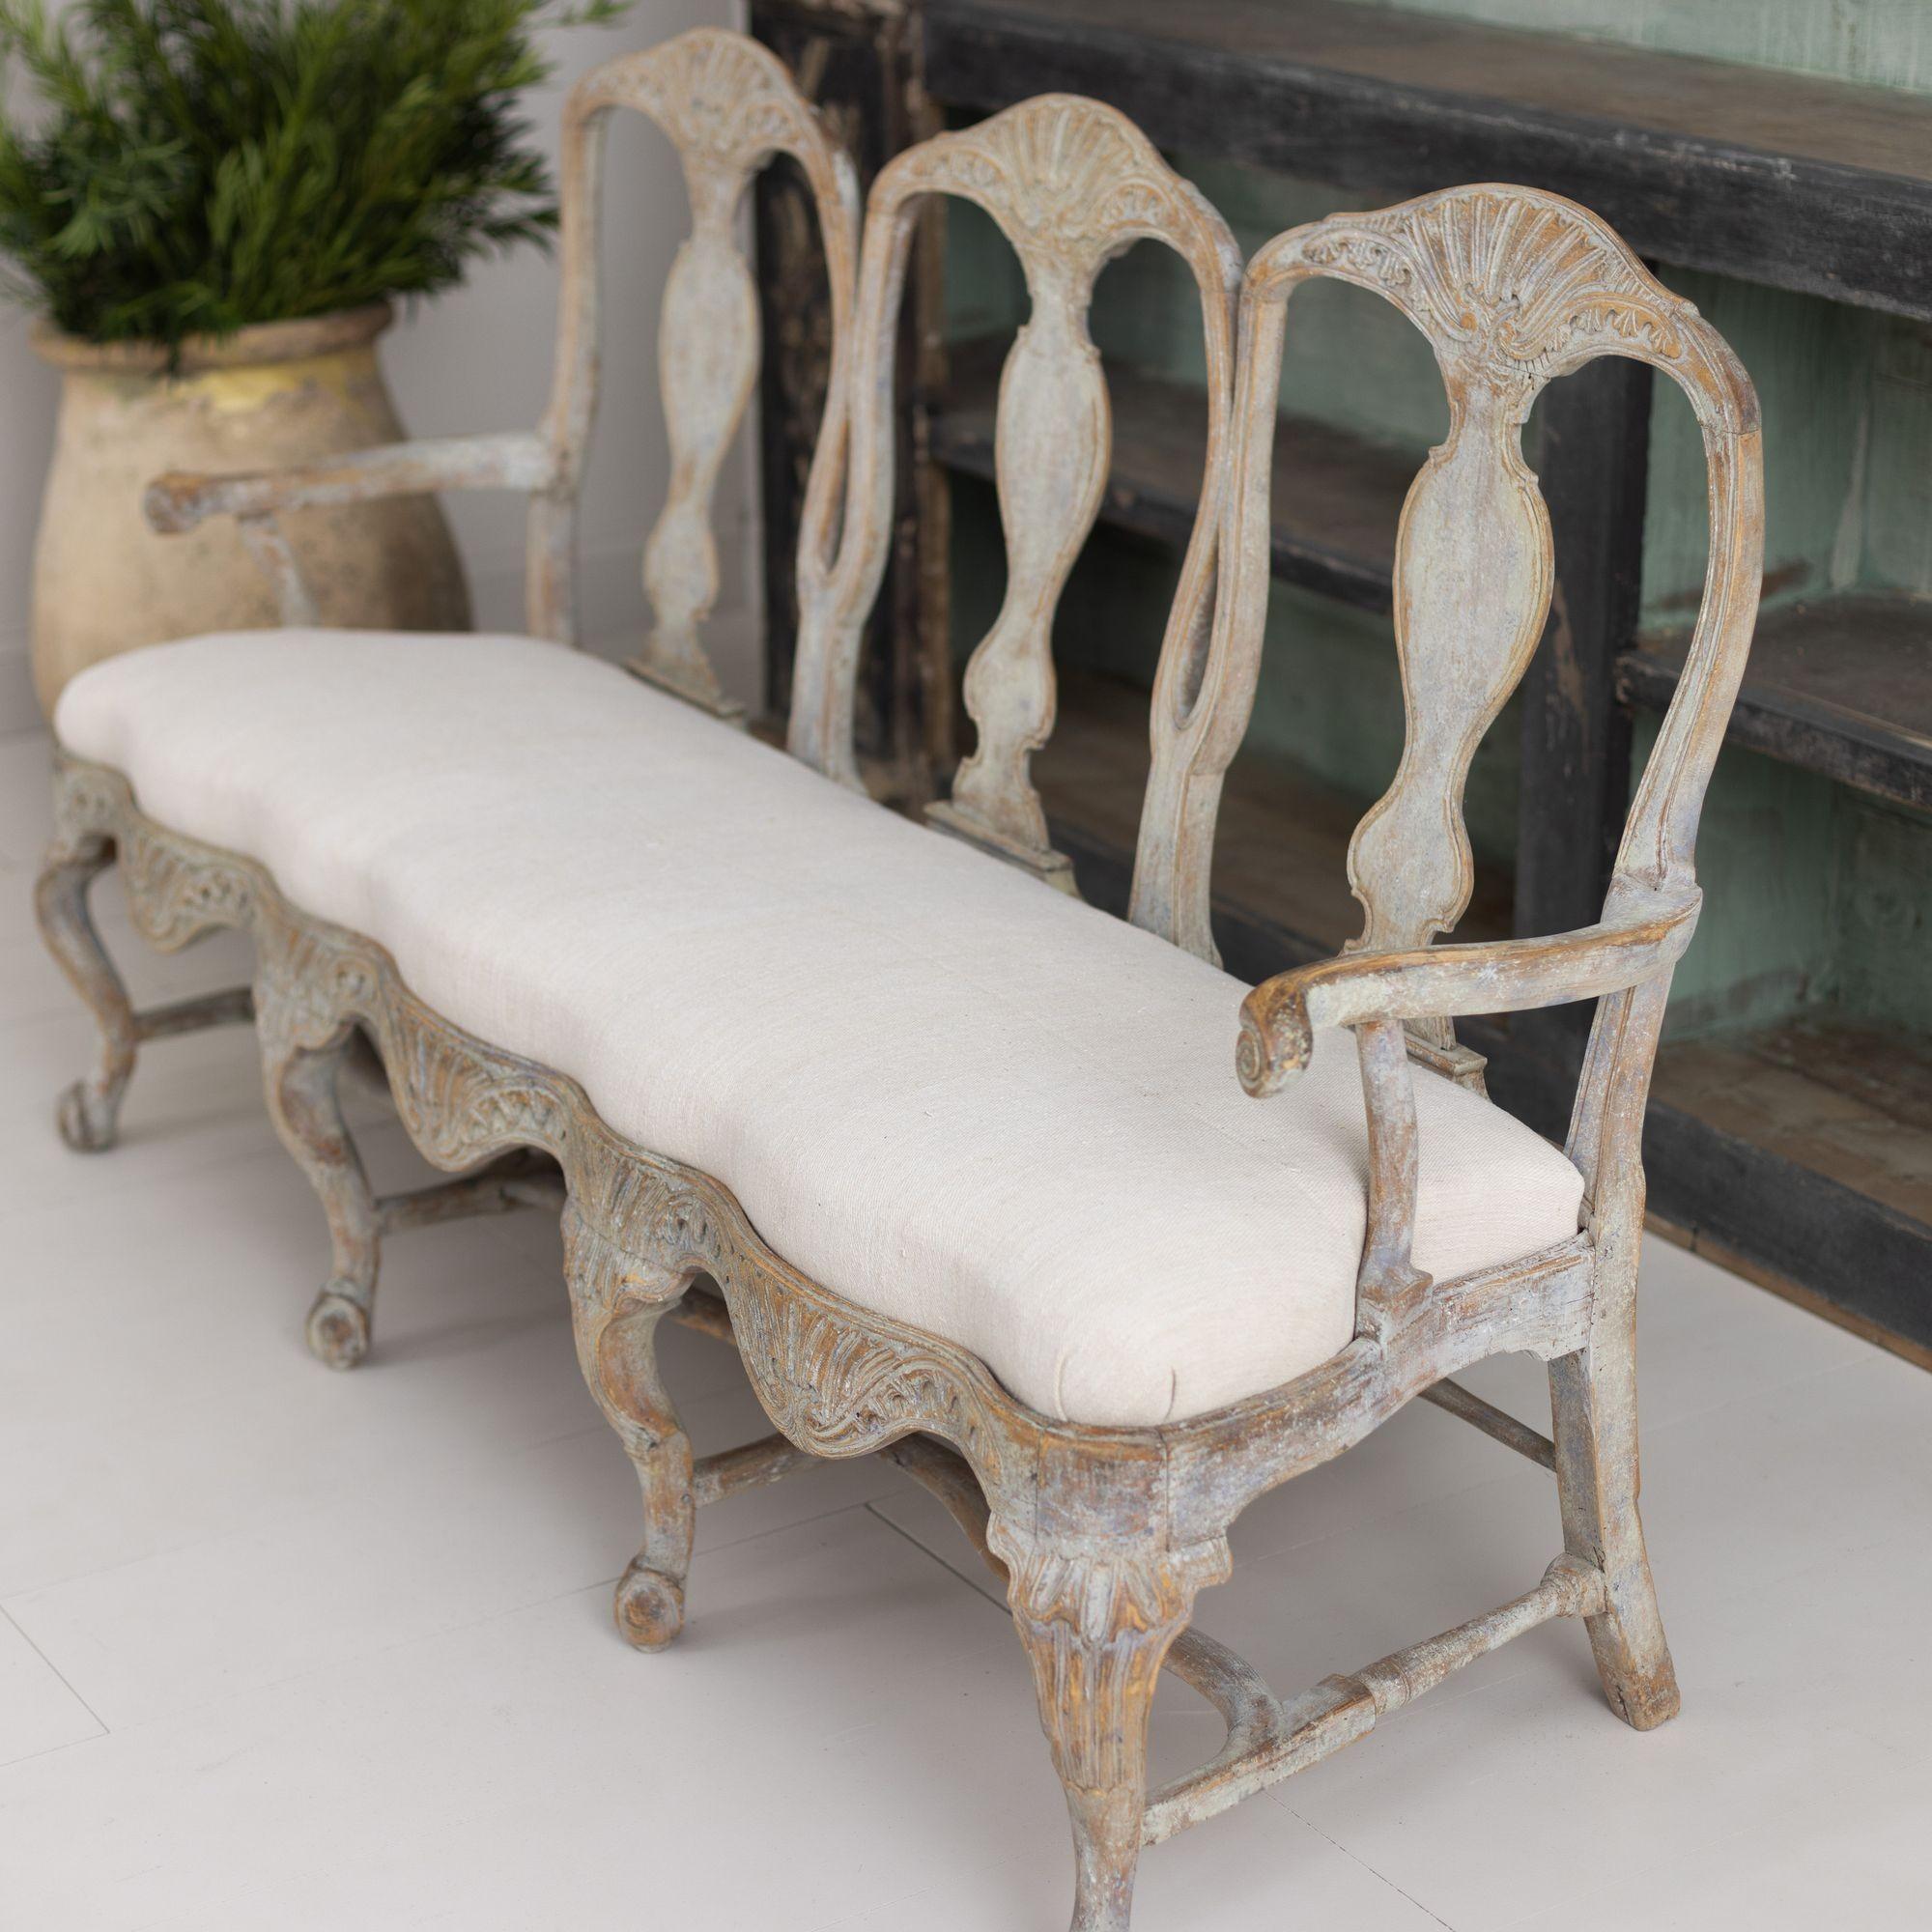 18th Century Swedish Rococo Period Settee or Sofa Bench in Original Paint For Sale 7